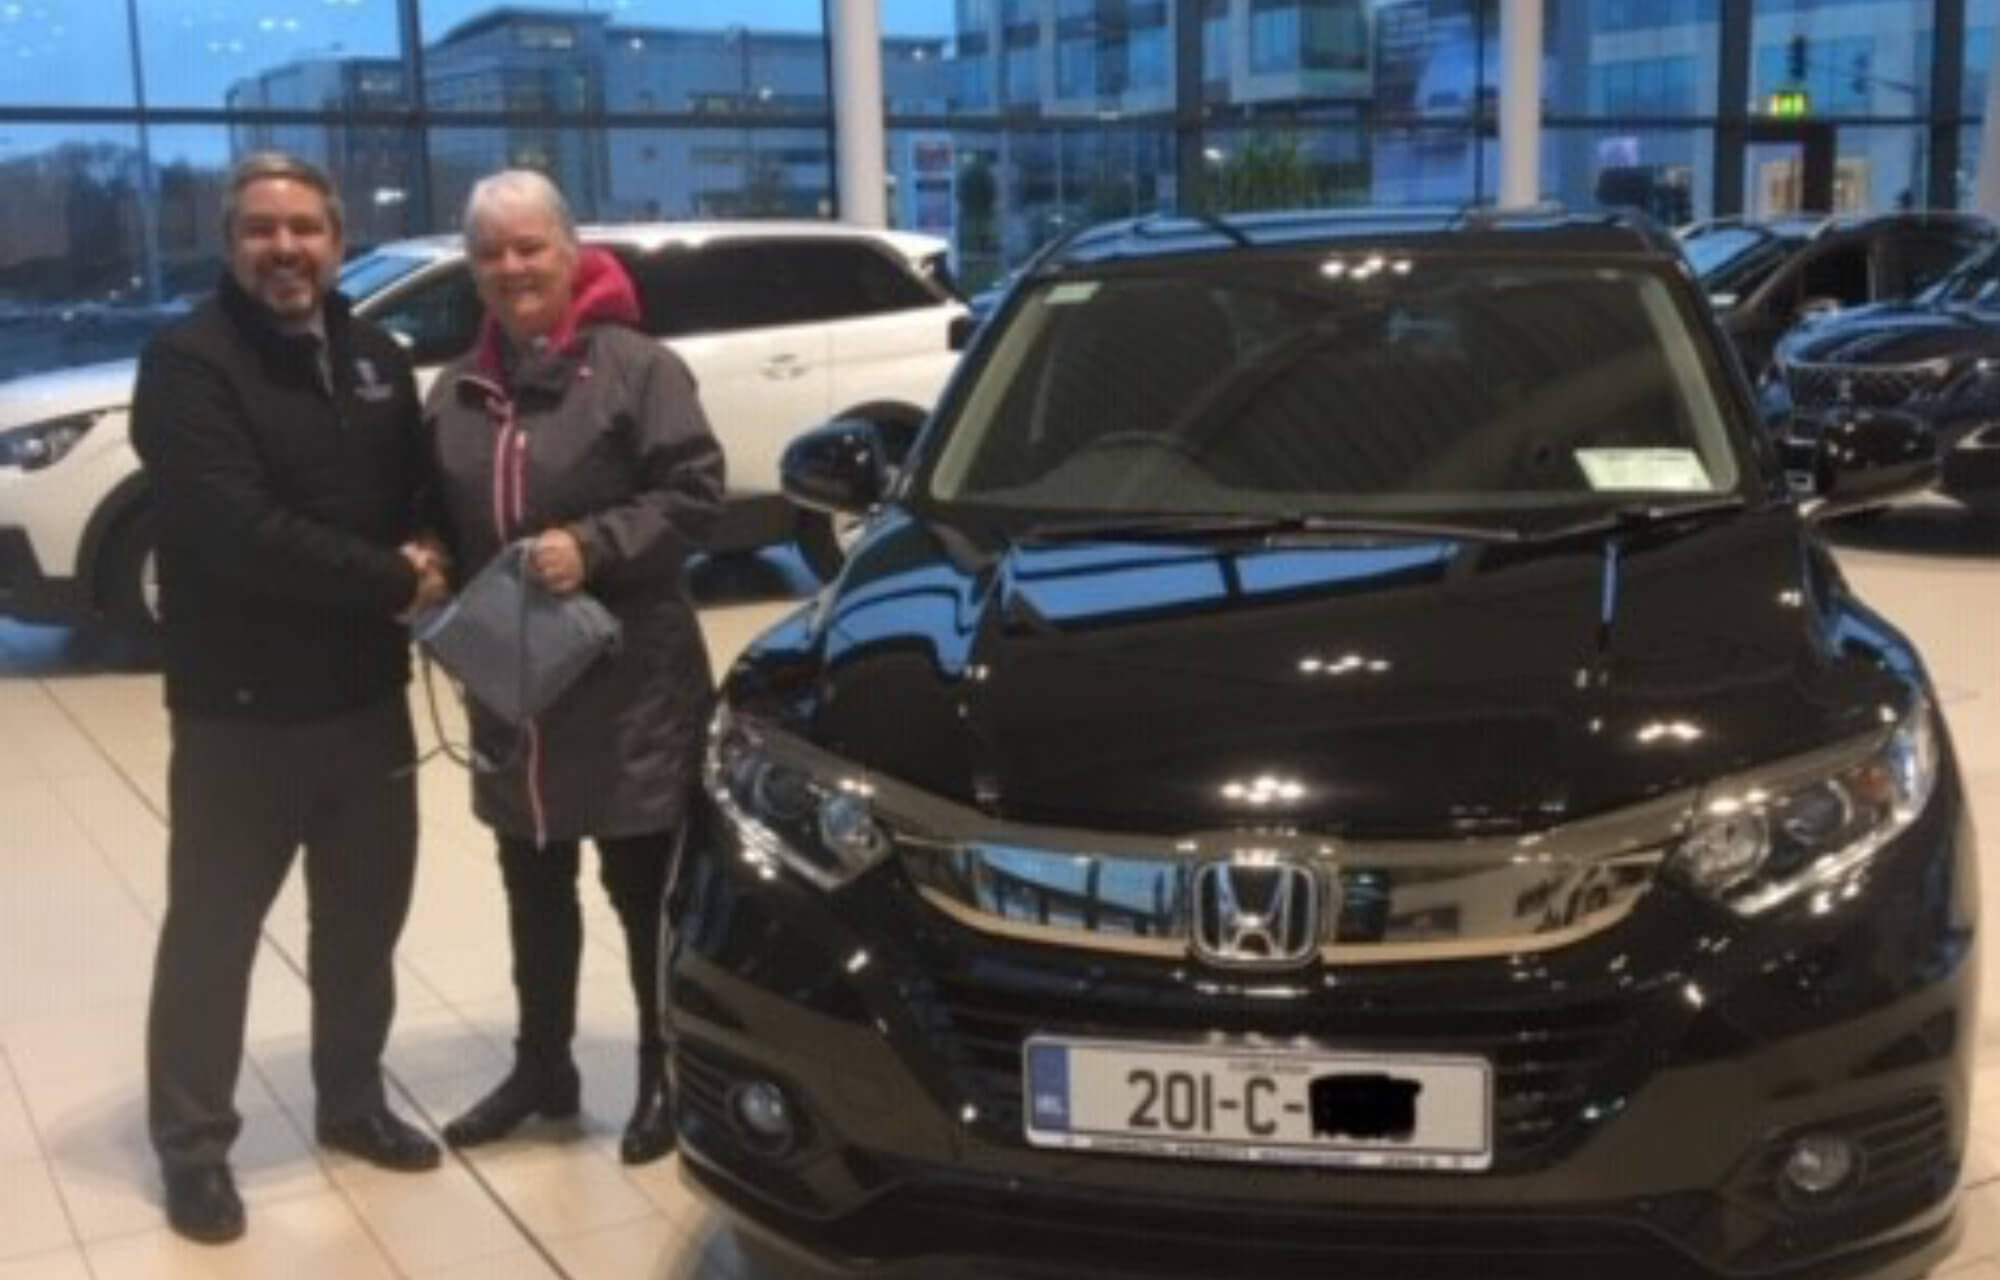 Marie collecting her new HR-V